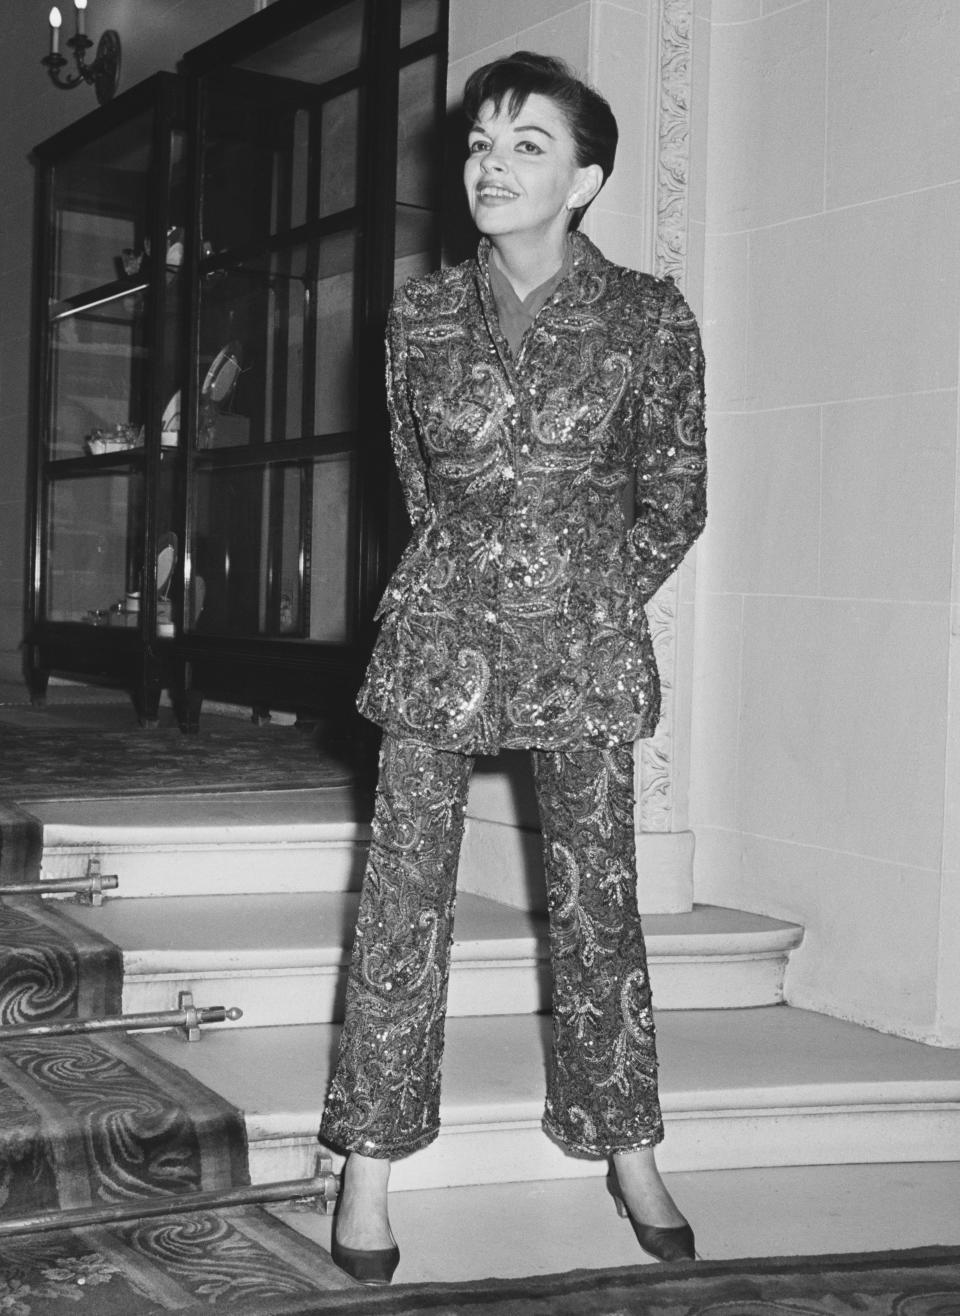 Garland wears a heavily embellished suit in this photo from 1968.&nbsp;